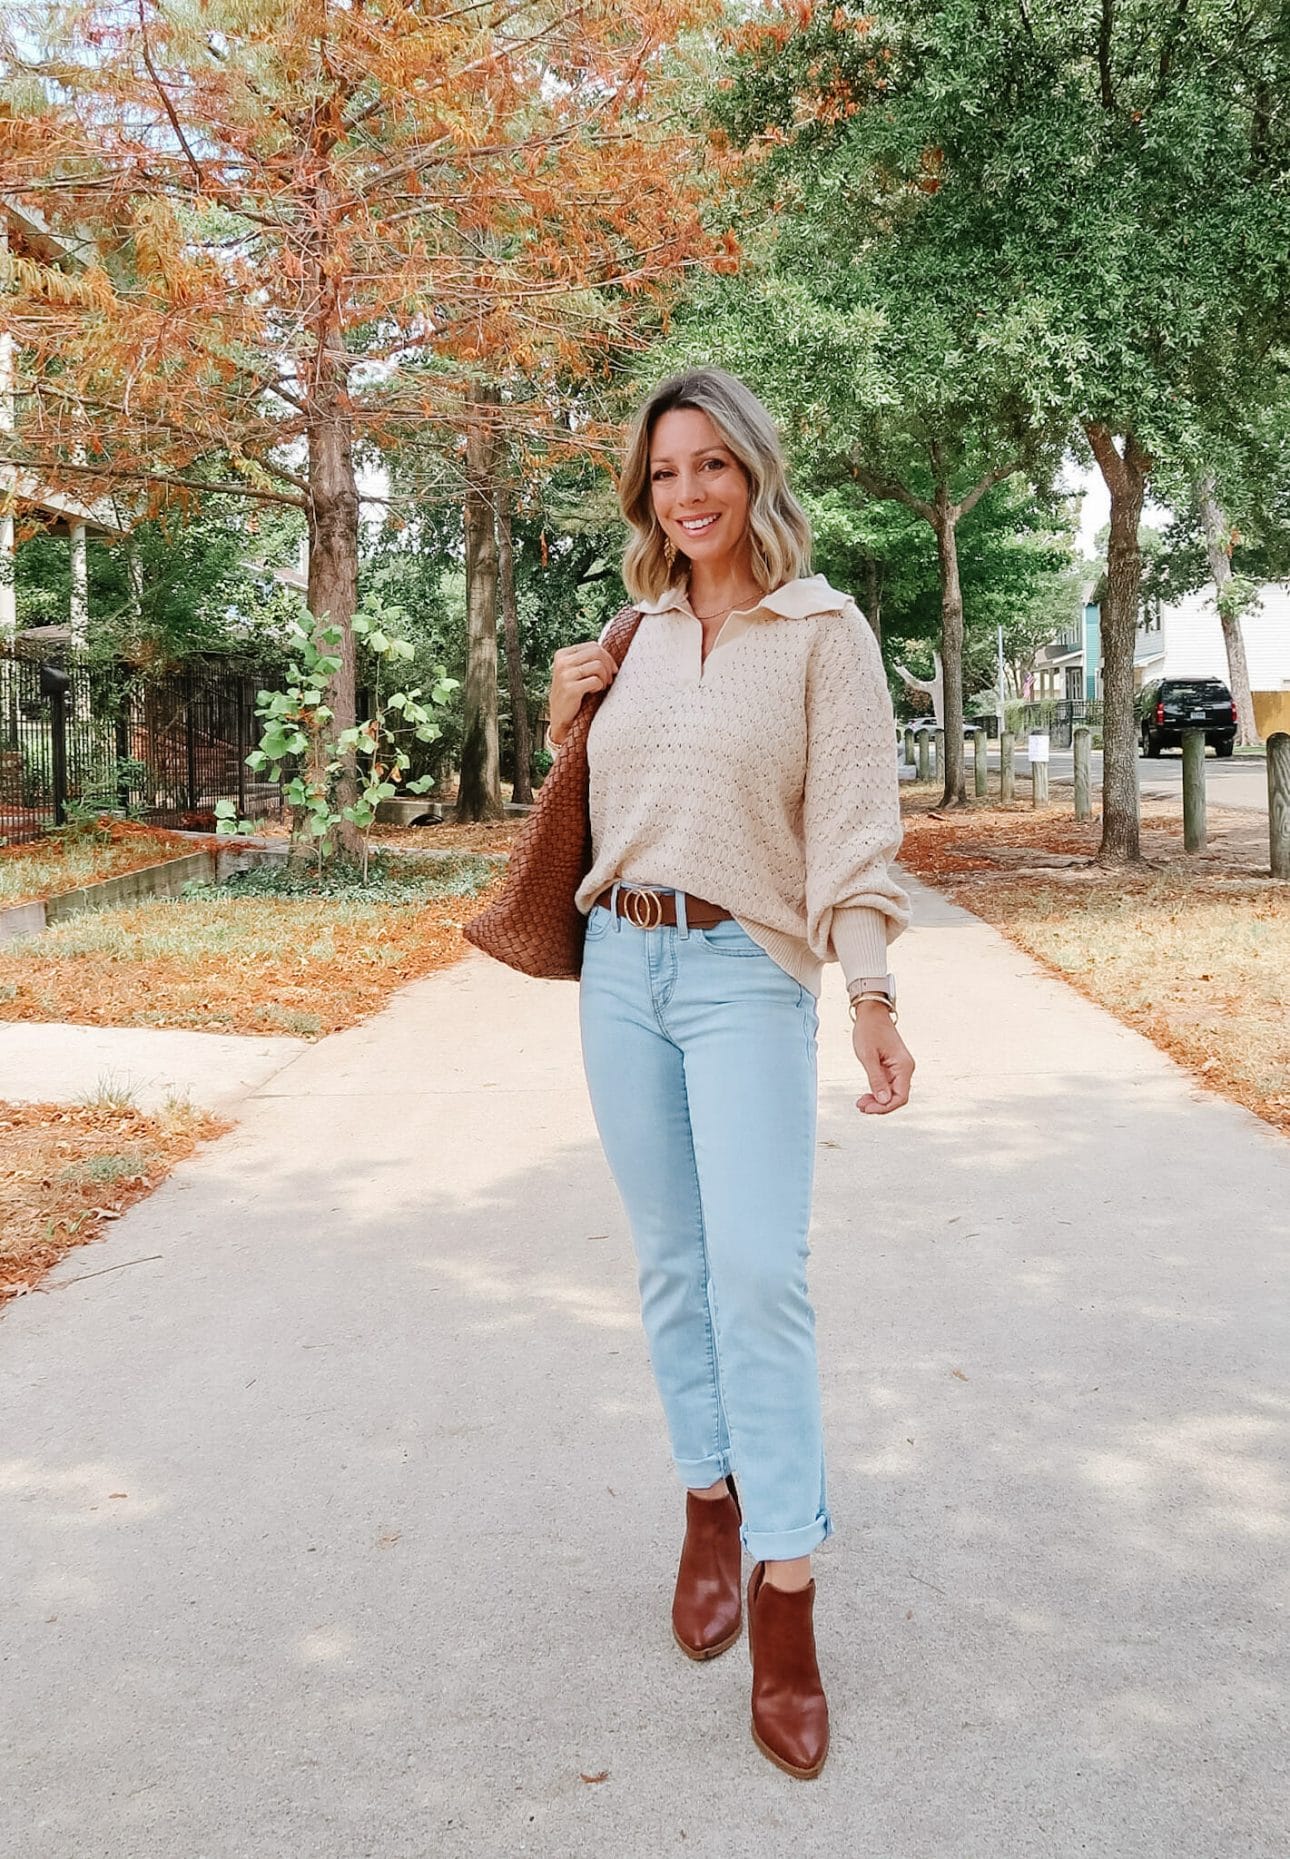 10 Travel Outfits for Fall Under $50 at